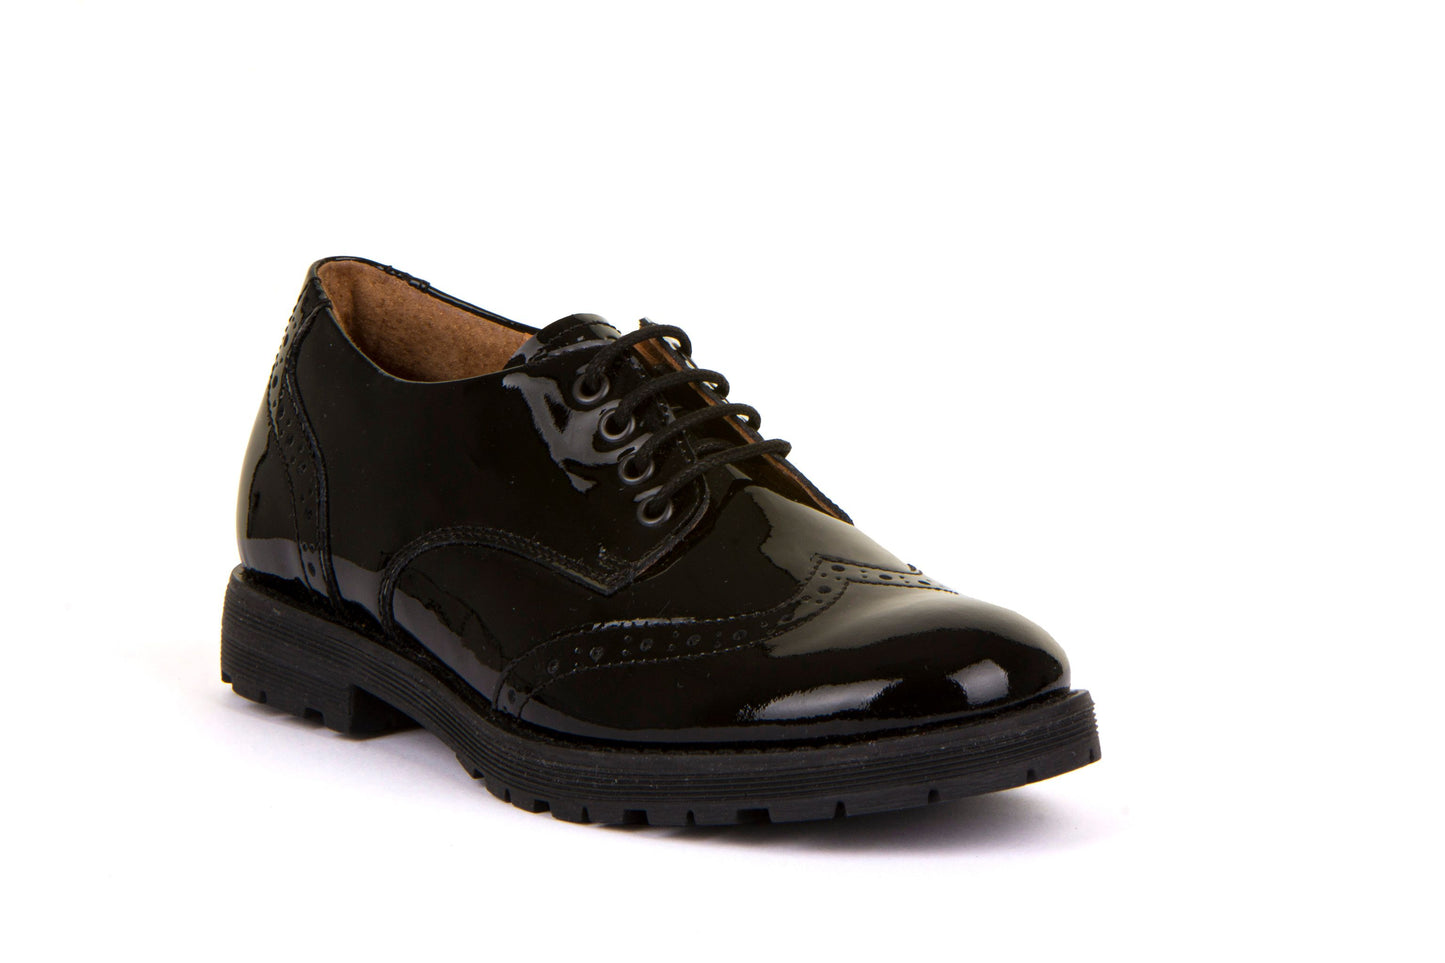 Froddo Black Patent leather Brogue lace up School Shoes